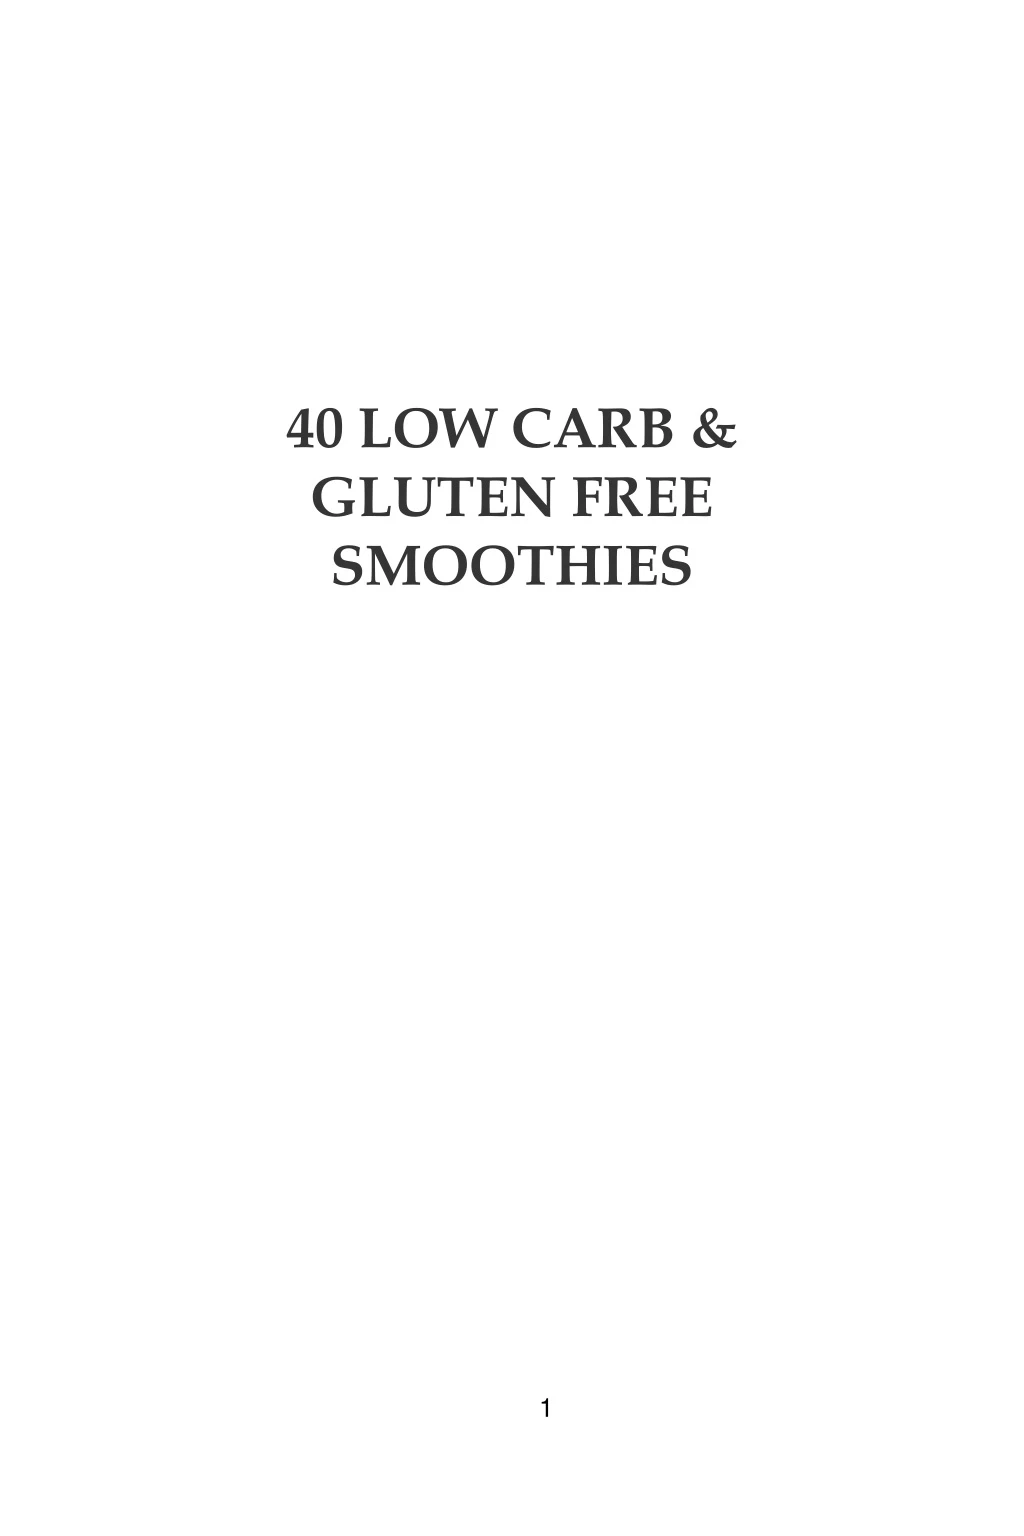 40 low carb gluten free smoothies